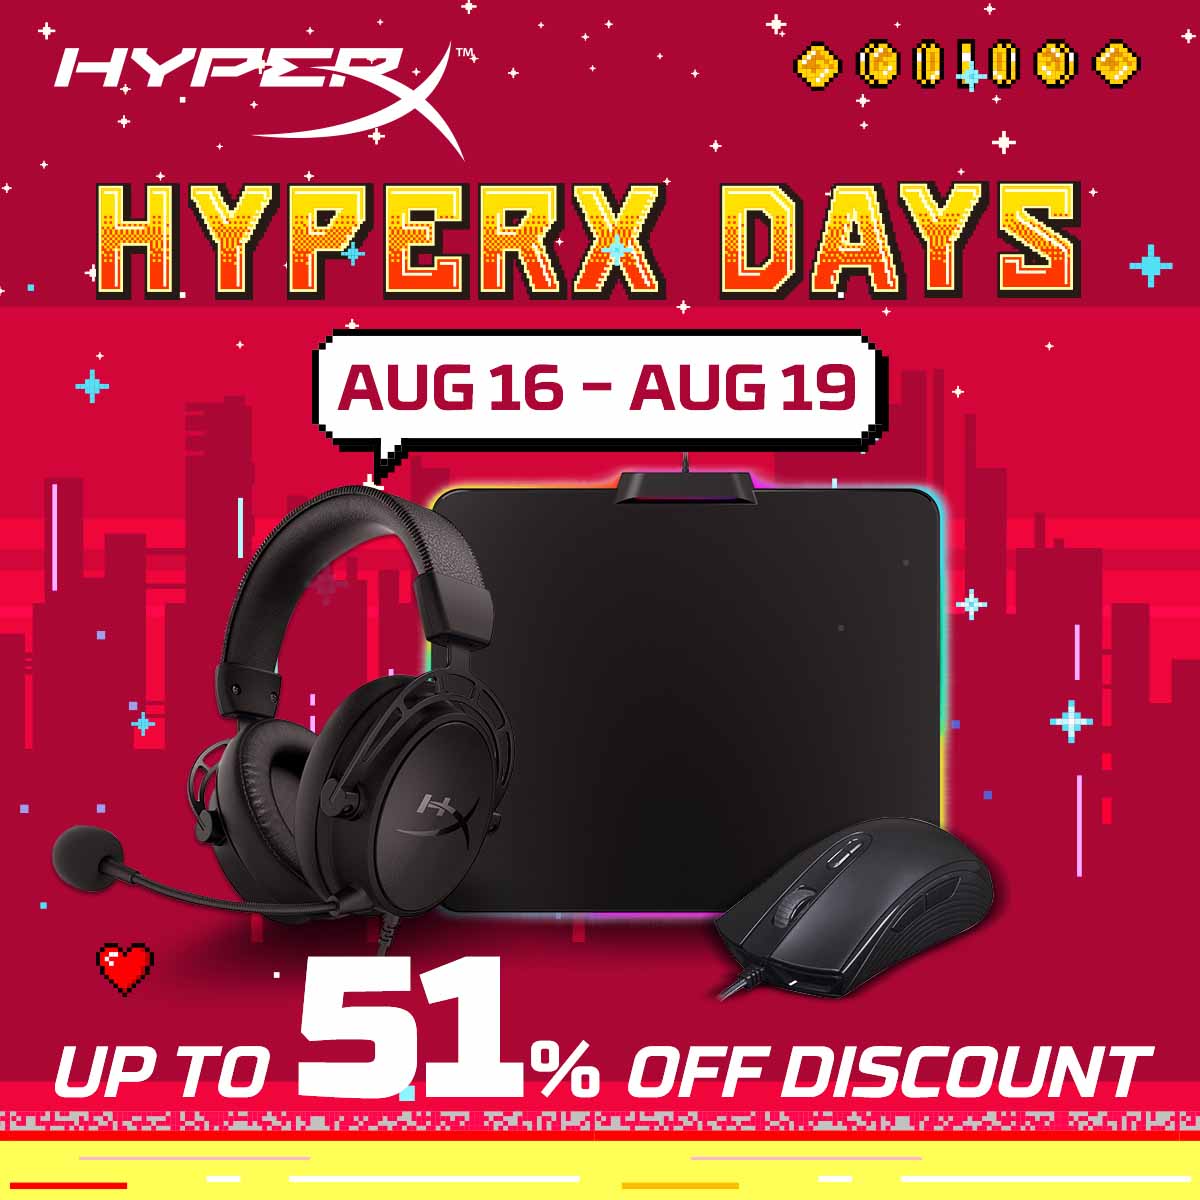 HyperX Days Promotion is Coming! Great Deals for Numerous Gaming Gear to Buy Now